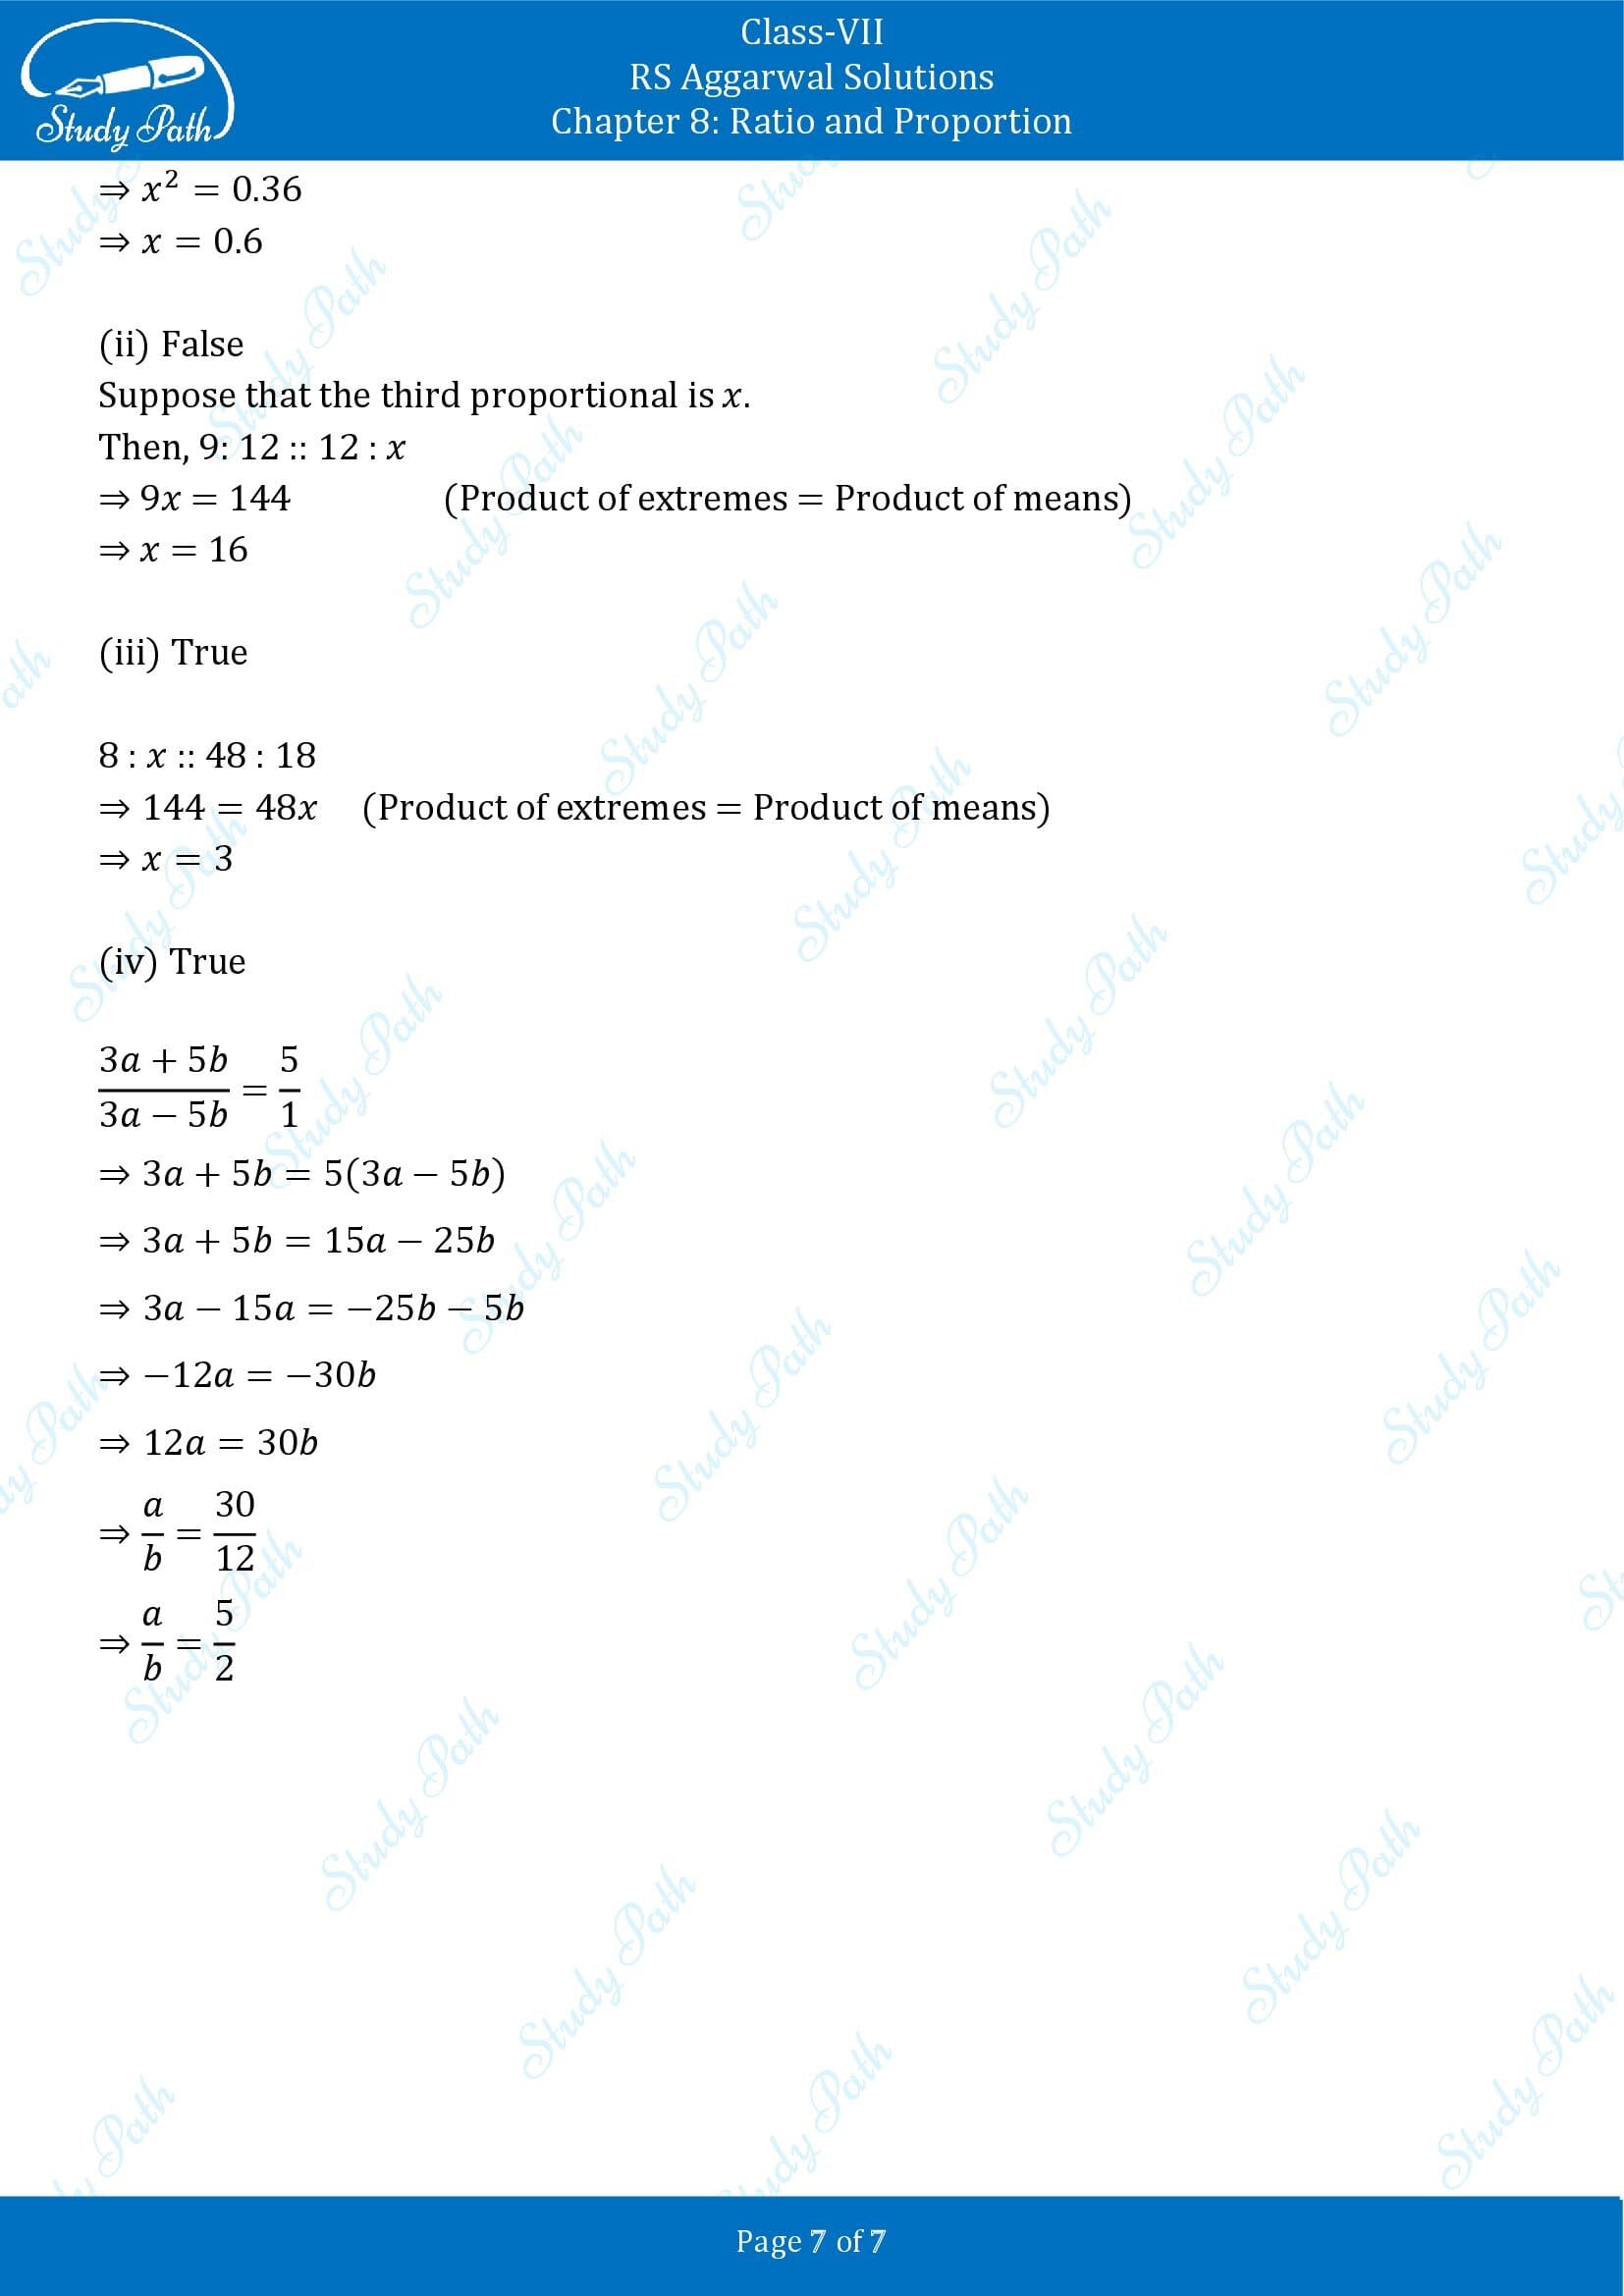 RS Aggarwal Solutions Class 7 Chapter 8 Ratio and Proportion Test Paper 00007